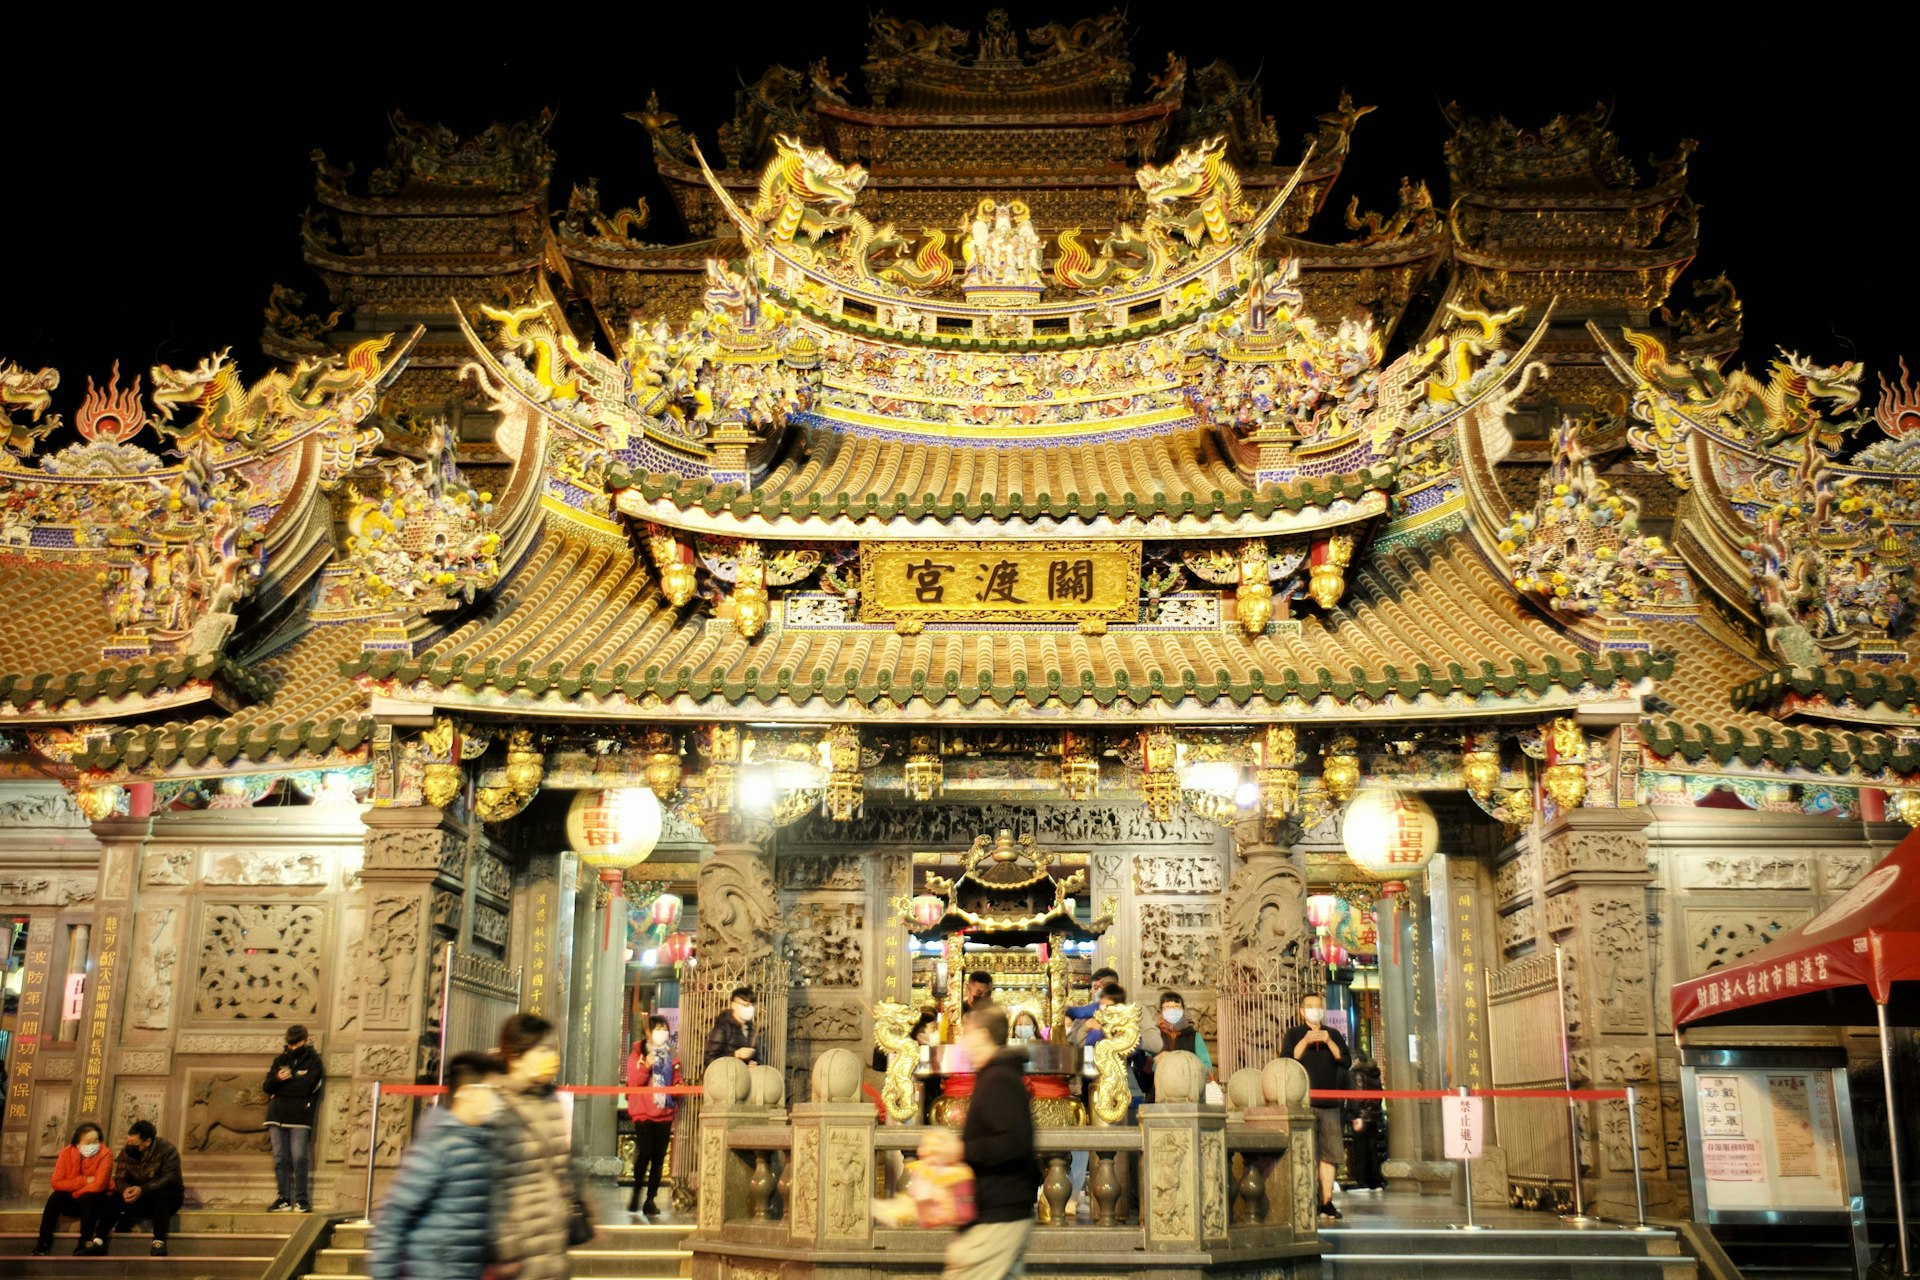 Local residents walk past in front of the golden Guandu Temple on the eve of Lunar New Year, Taipei, Taiwan